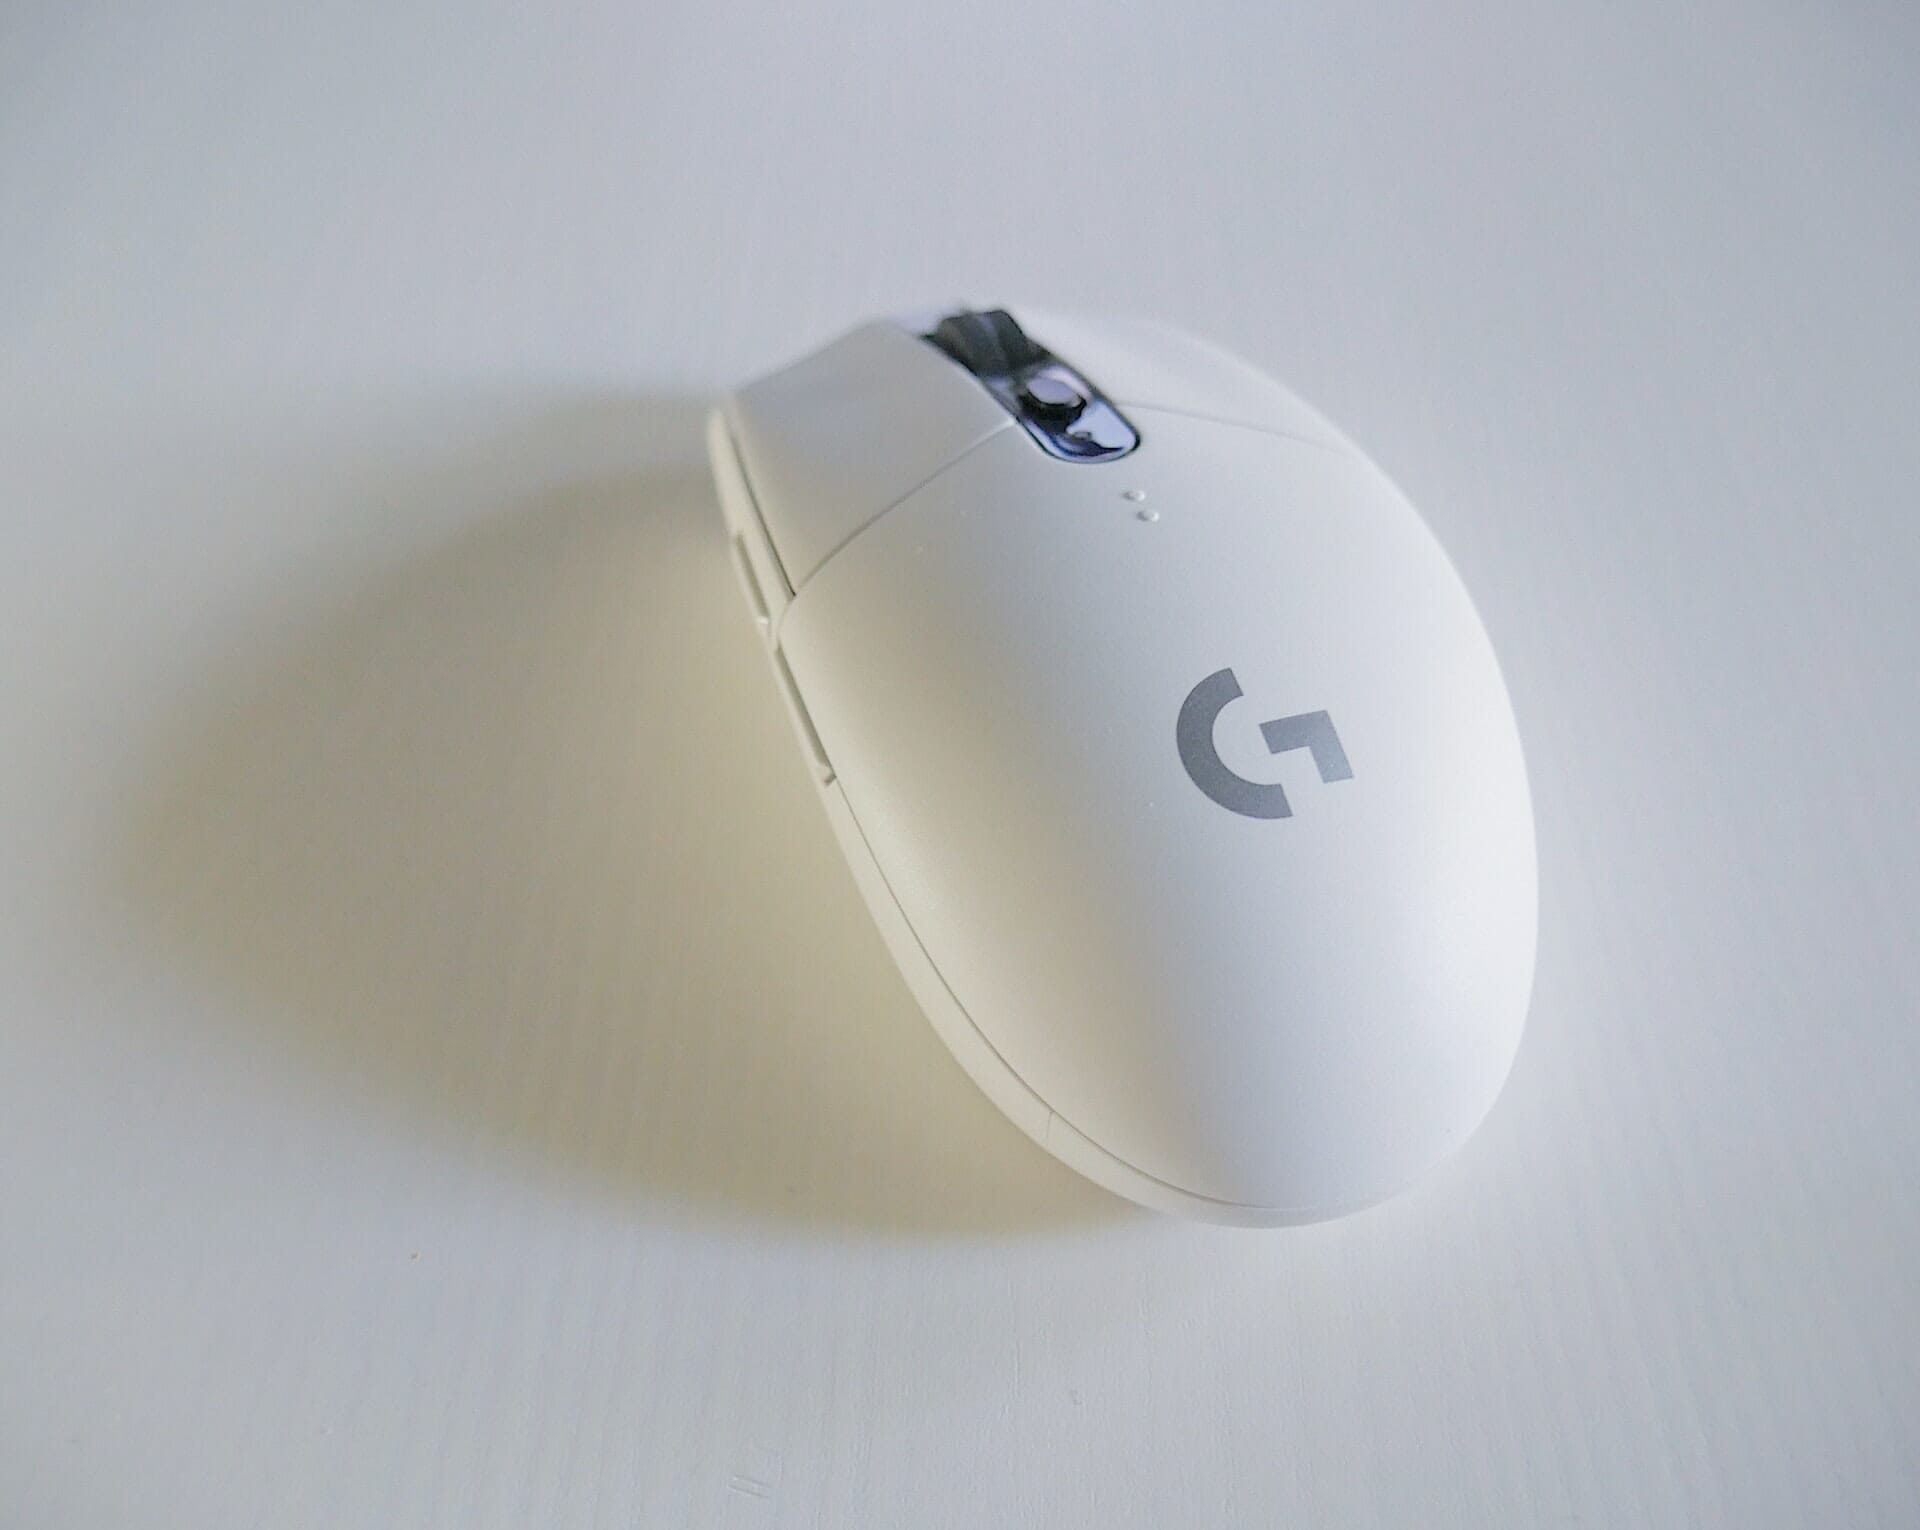 Refrigerate Write a report Lying How to fix the Logitech G305 mouse cursor stuttering